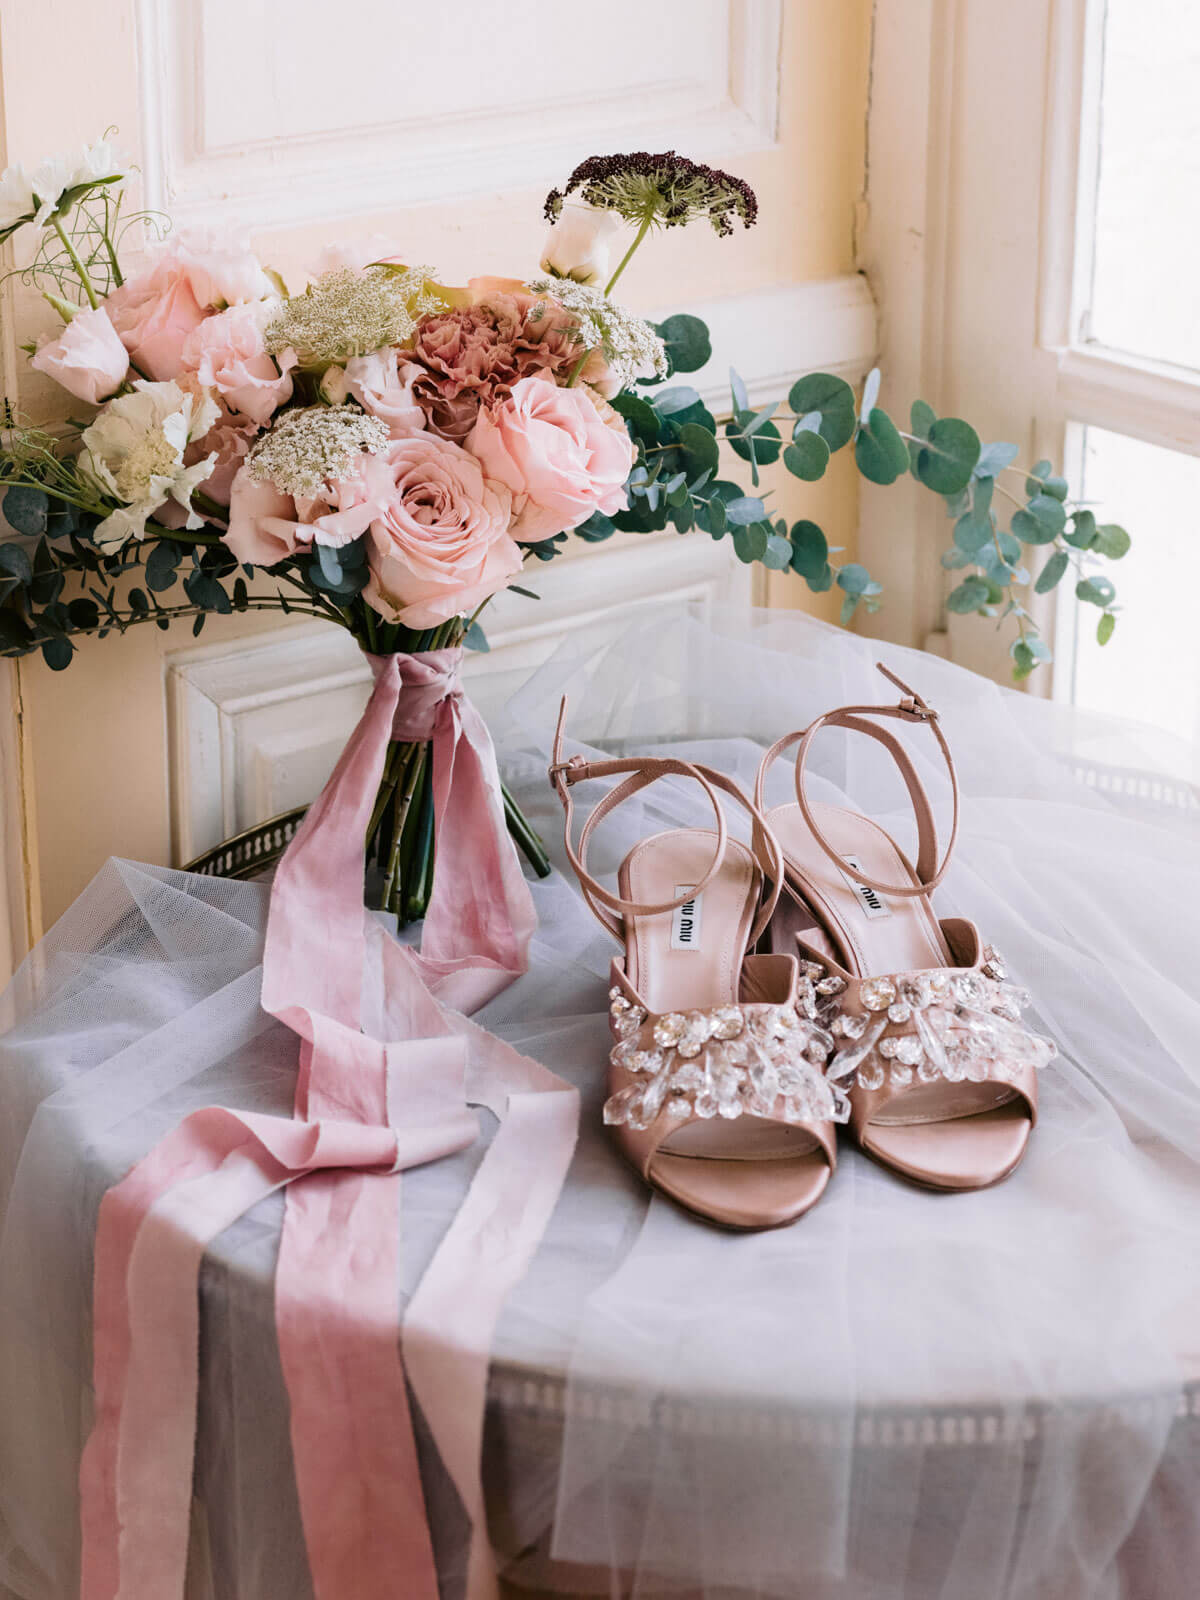 The bride's flower bouquet and her wedding shoes placed on a table. Outdoor wedding destination image by Jenny Fu Studio